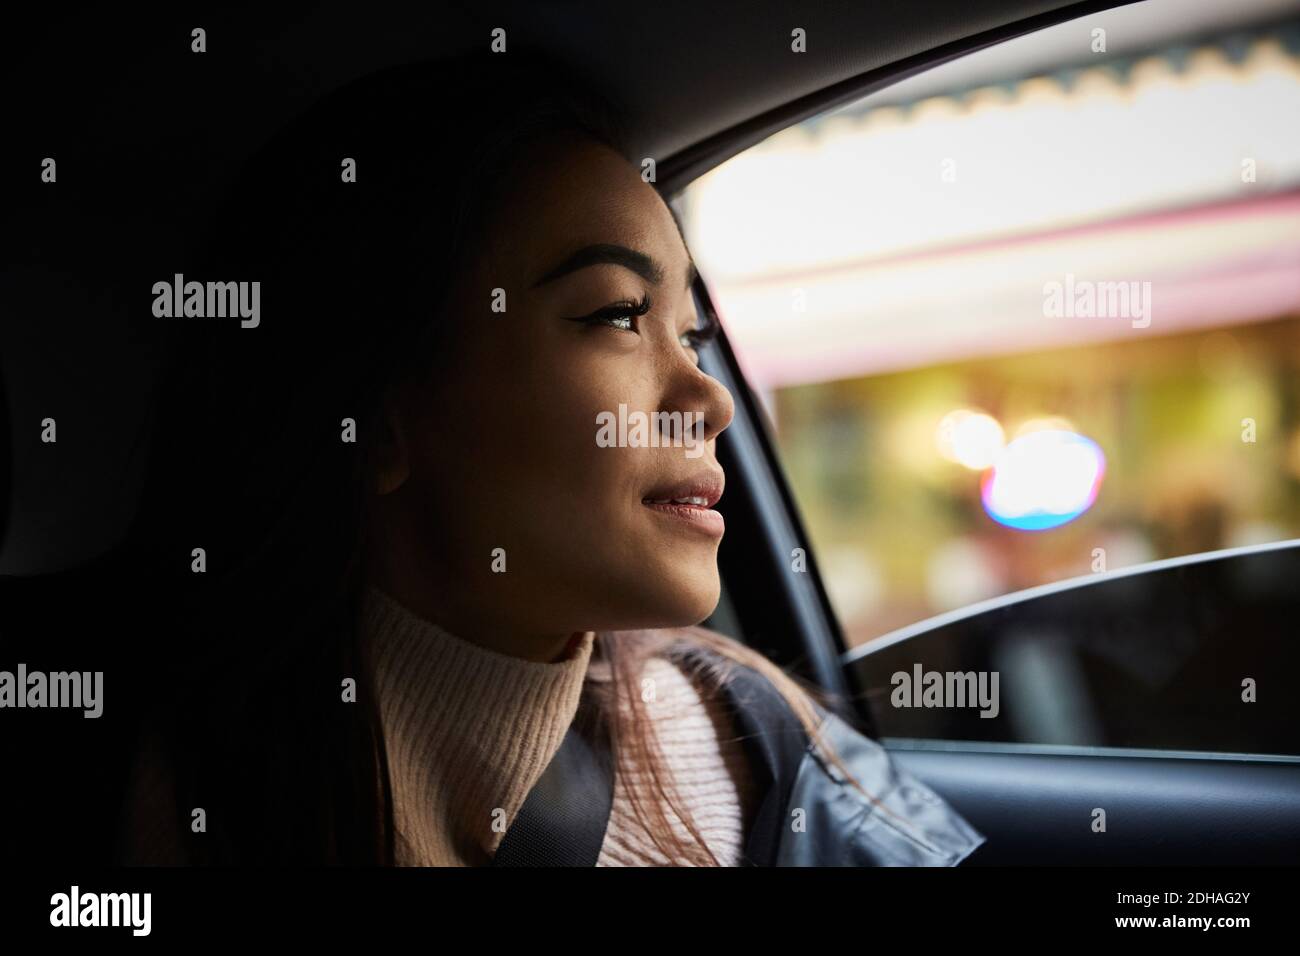 Thoughtful young woman looking through window while sitting in car Stock Photo